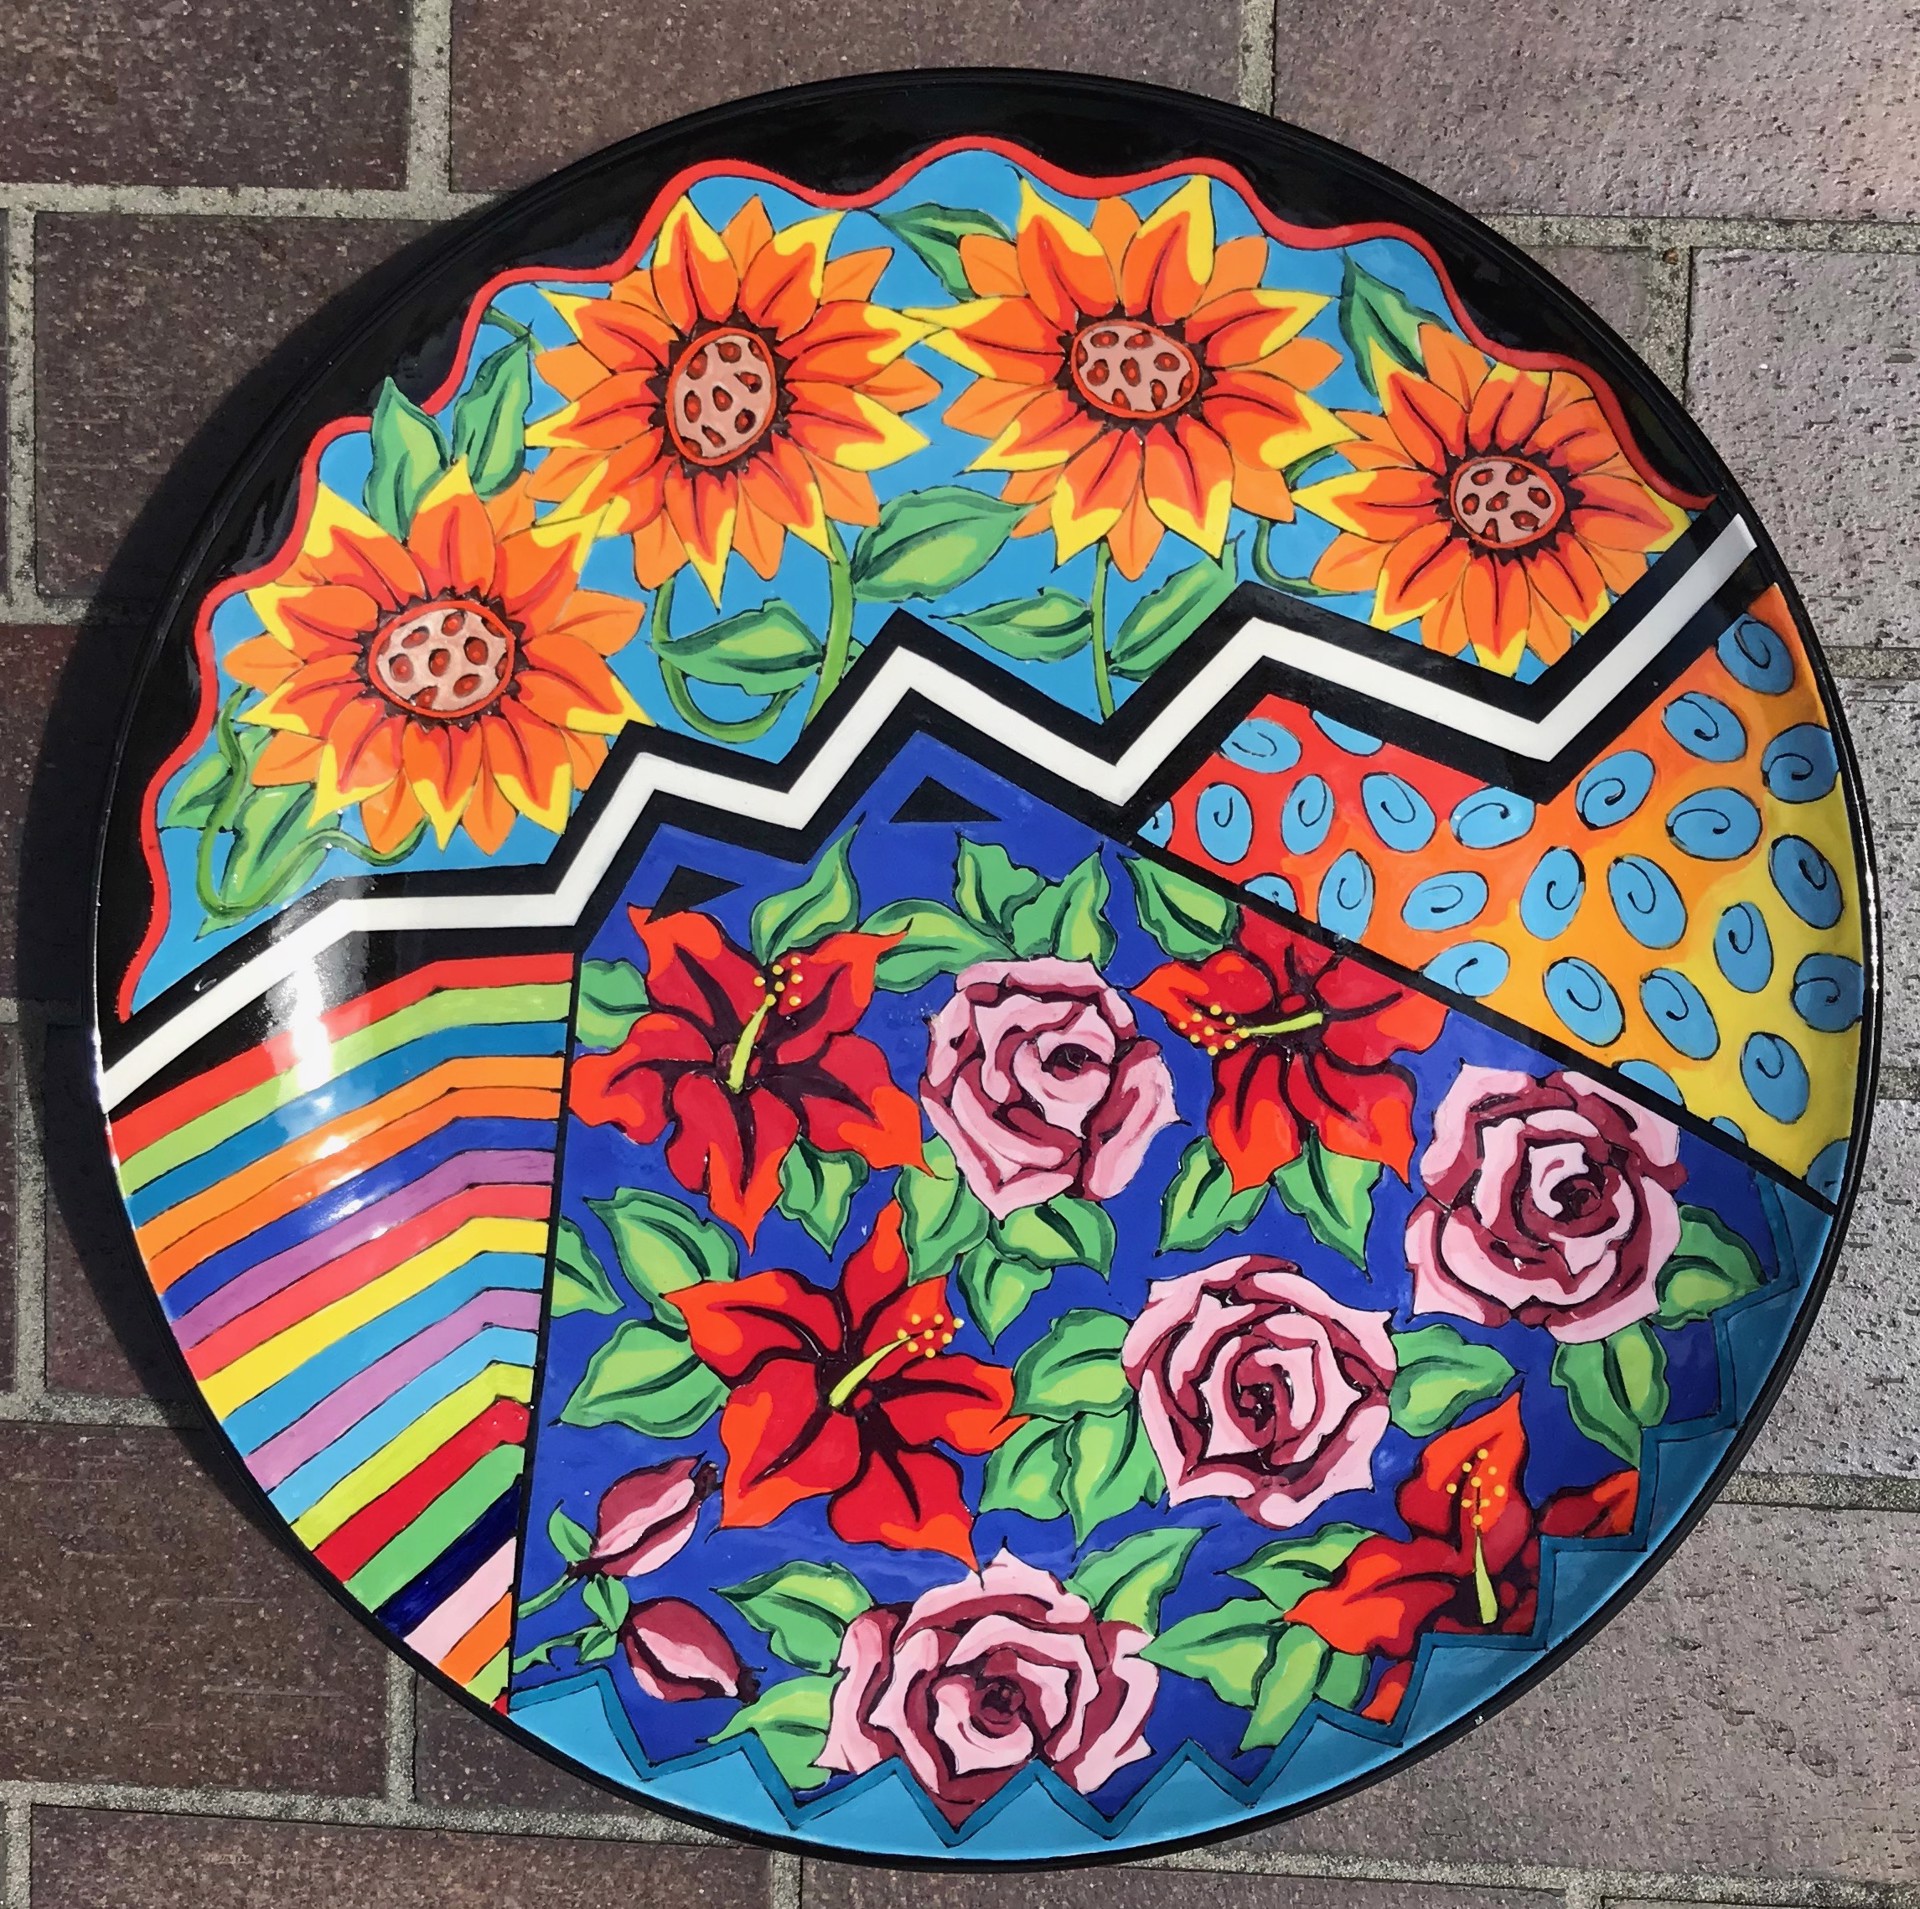 16" Large Platter by Denise Ford